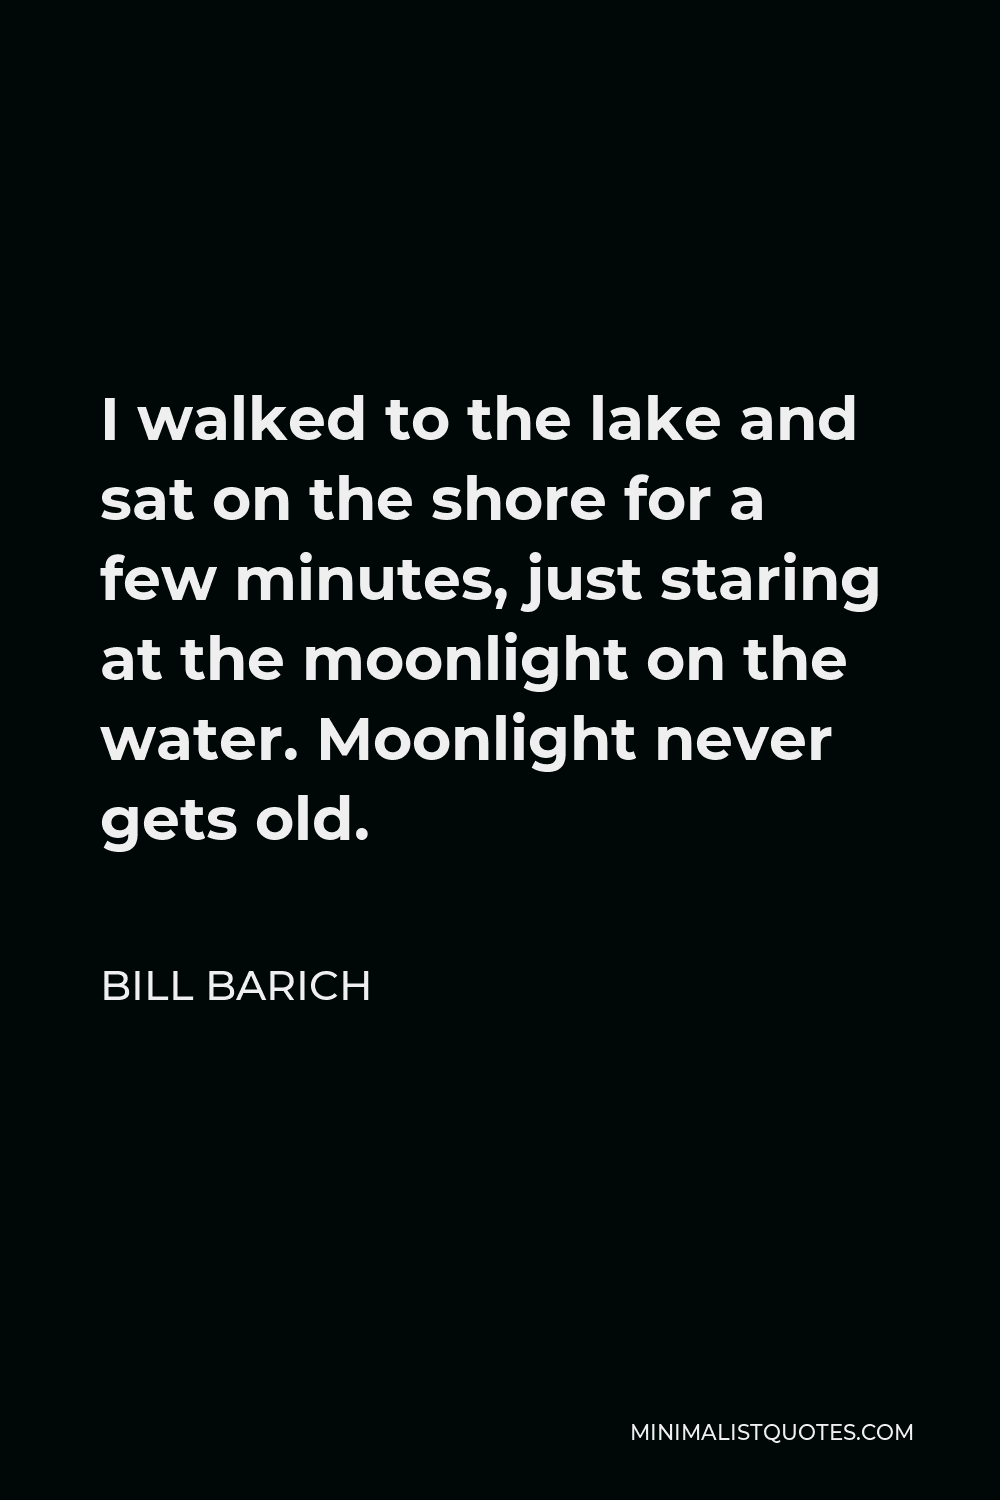 Bill Barich Quote - I walked to the lake and sat on the shore for a few minutes, just staring at the moonlight on the water. Moonlight never gets old.